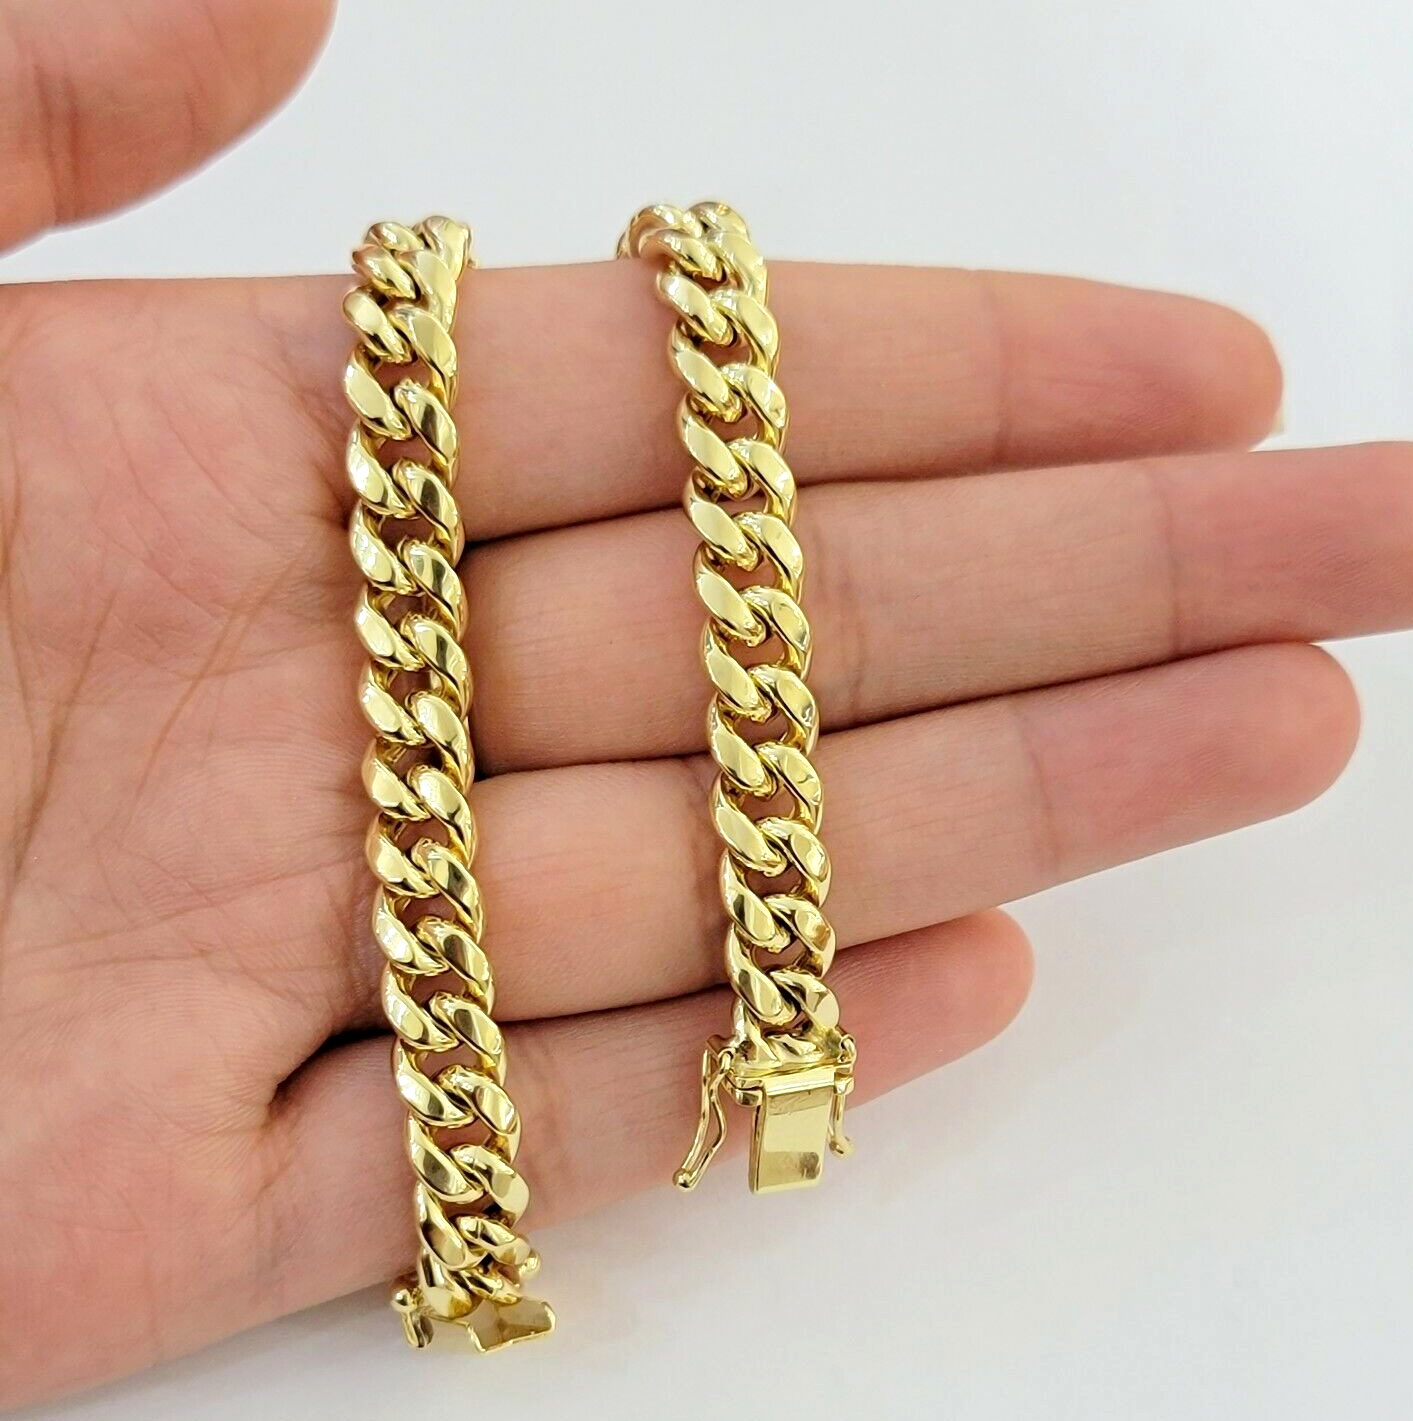 Real 14k Gold Bracelet 9 inch 8mm Miami Cuban Link Box Clasp Strong 14kt , Men's